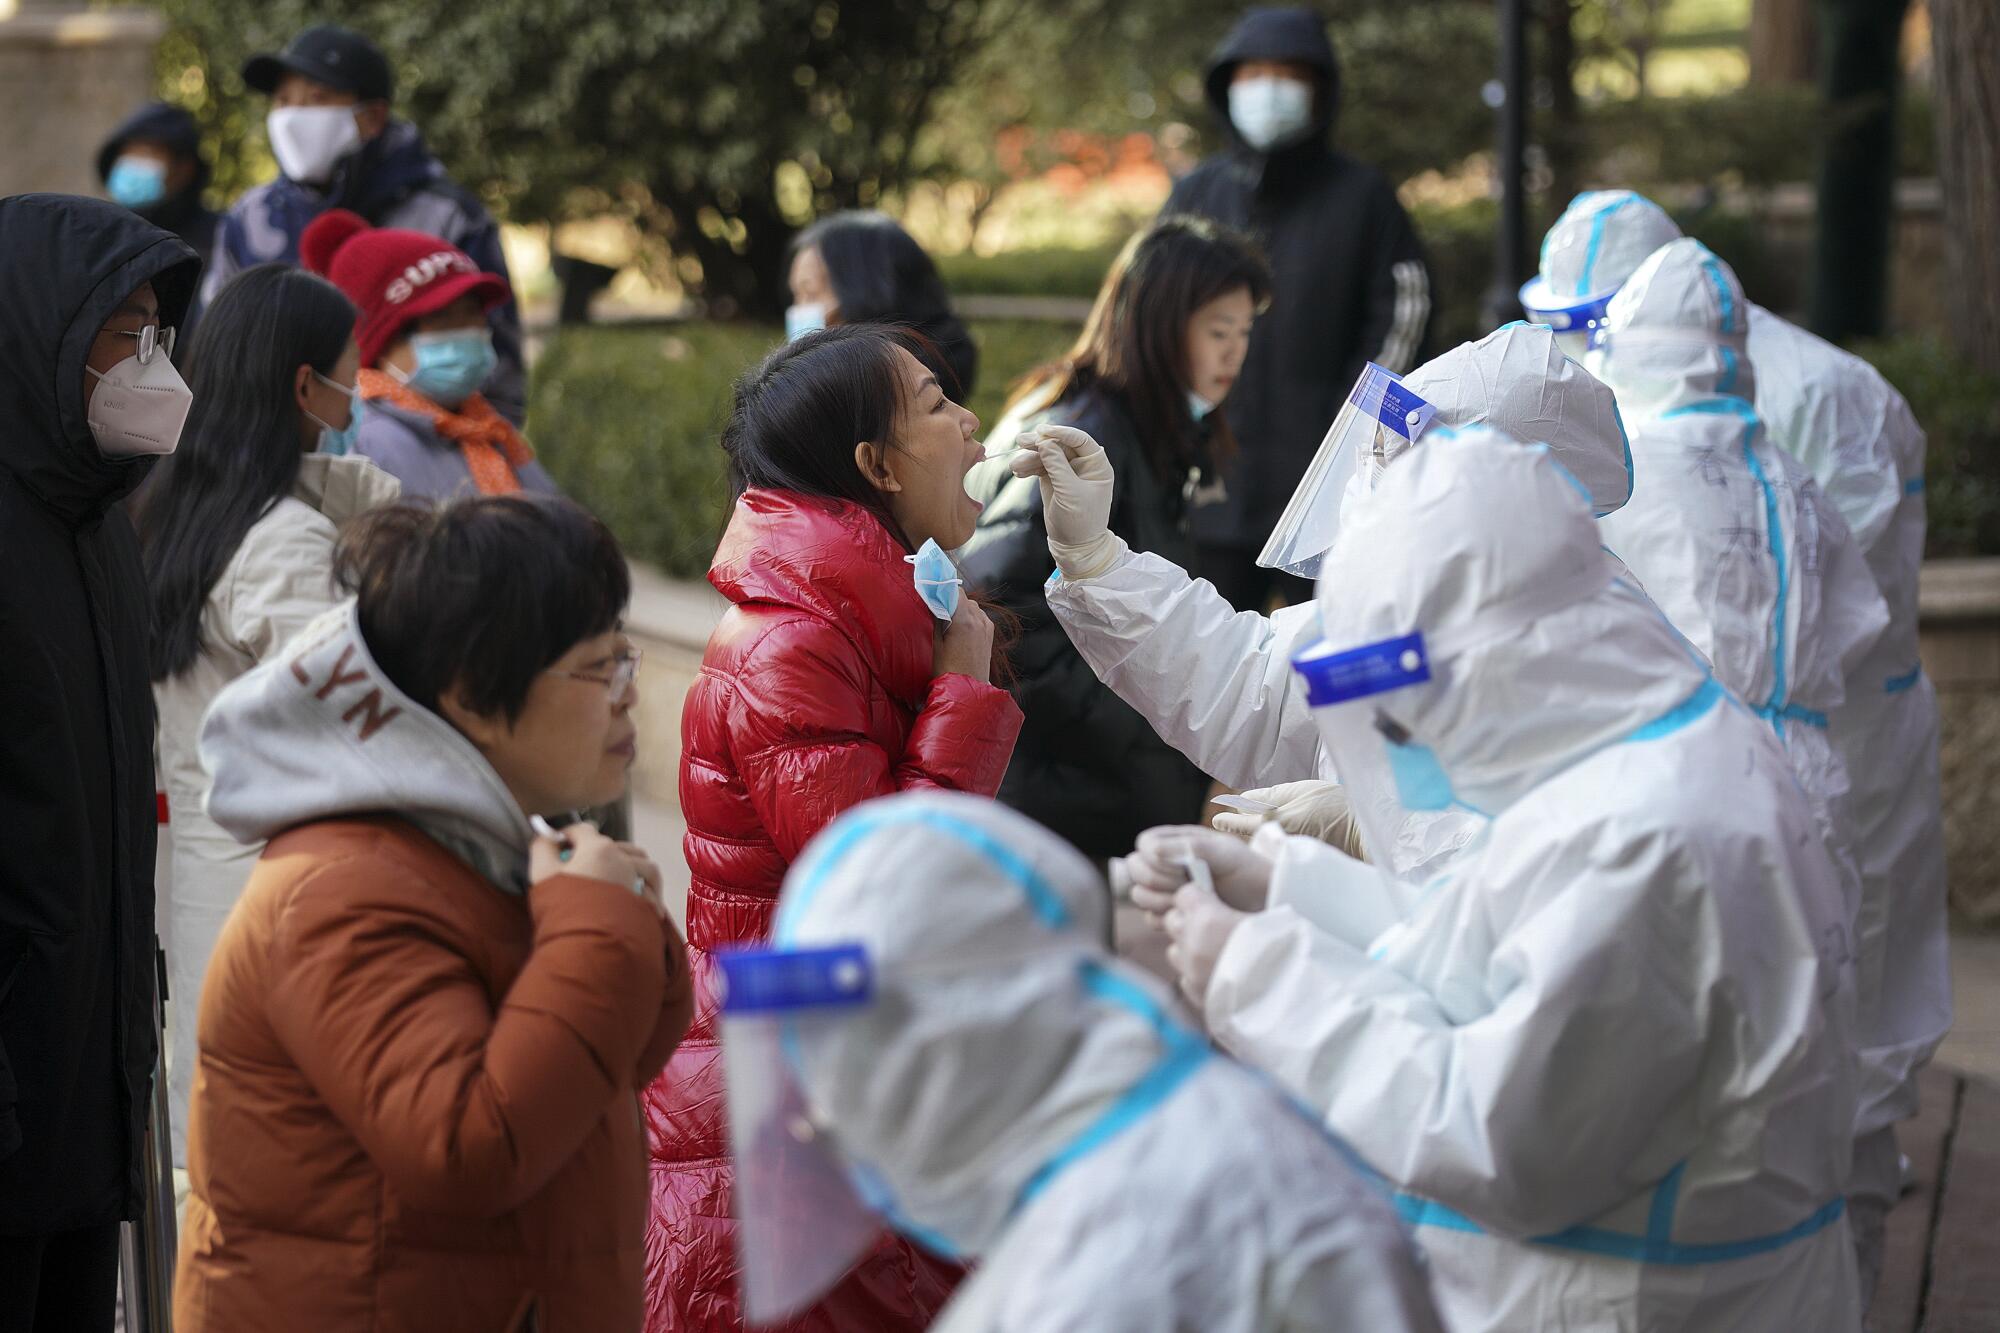 Medical workers in protective suits take swabs from residents in Shijiazhuang, China.